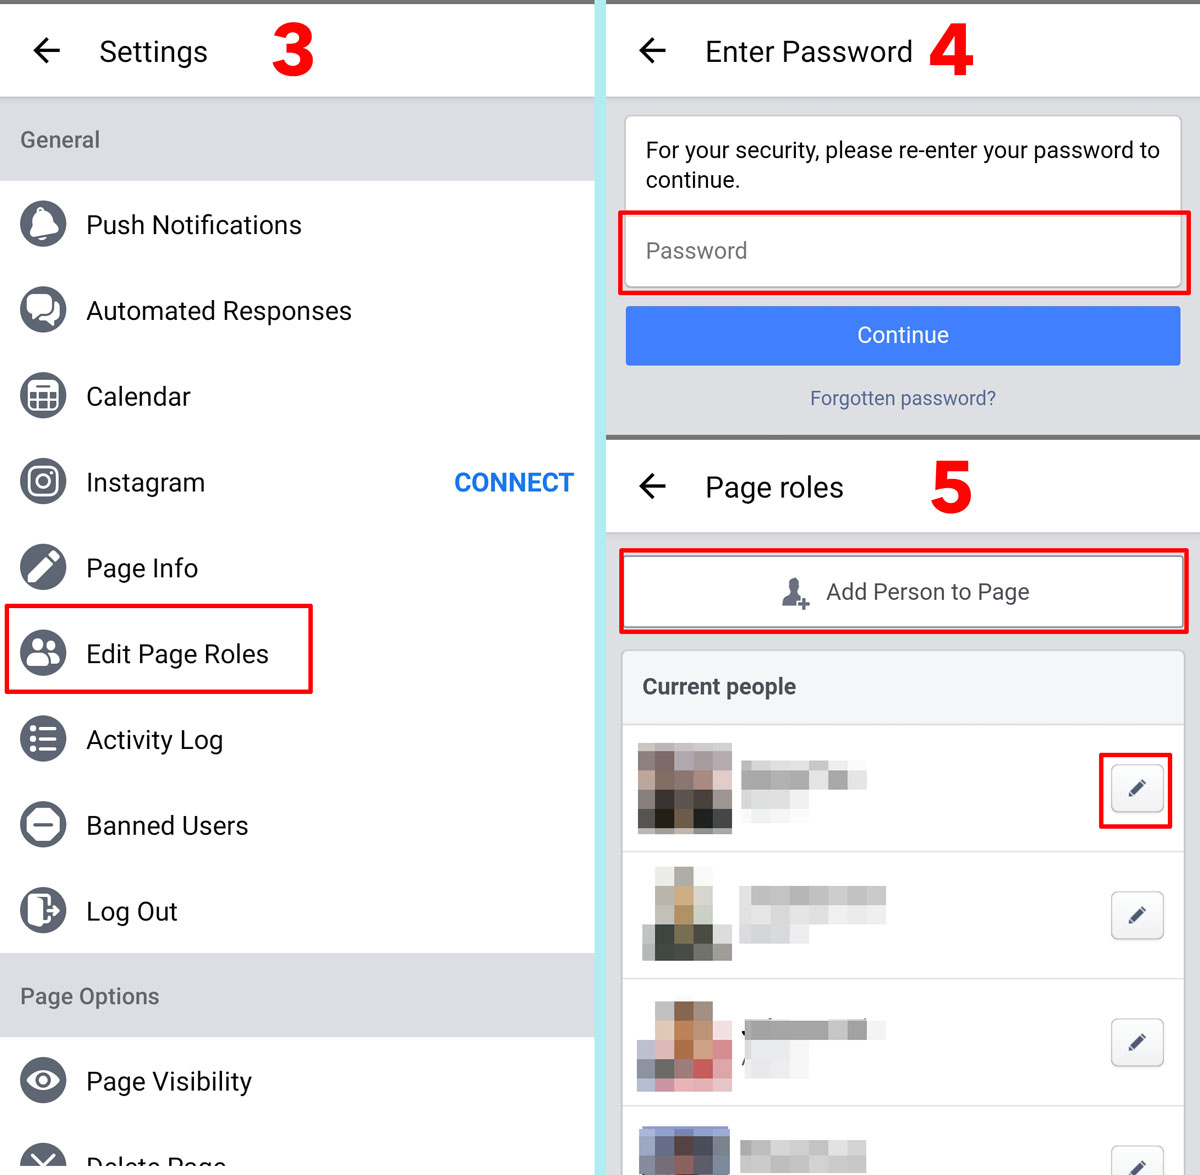 How To Change Facebook Page Admin Role To A Lower Level Role?